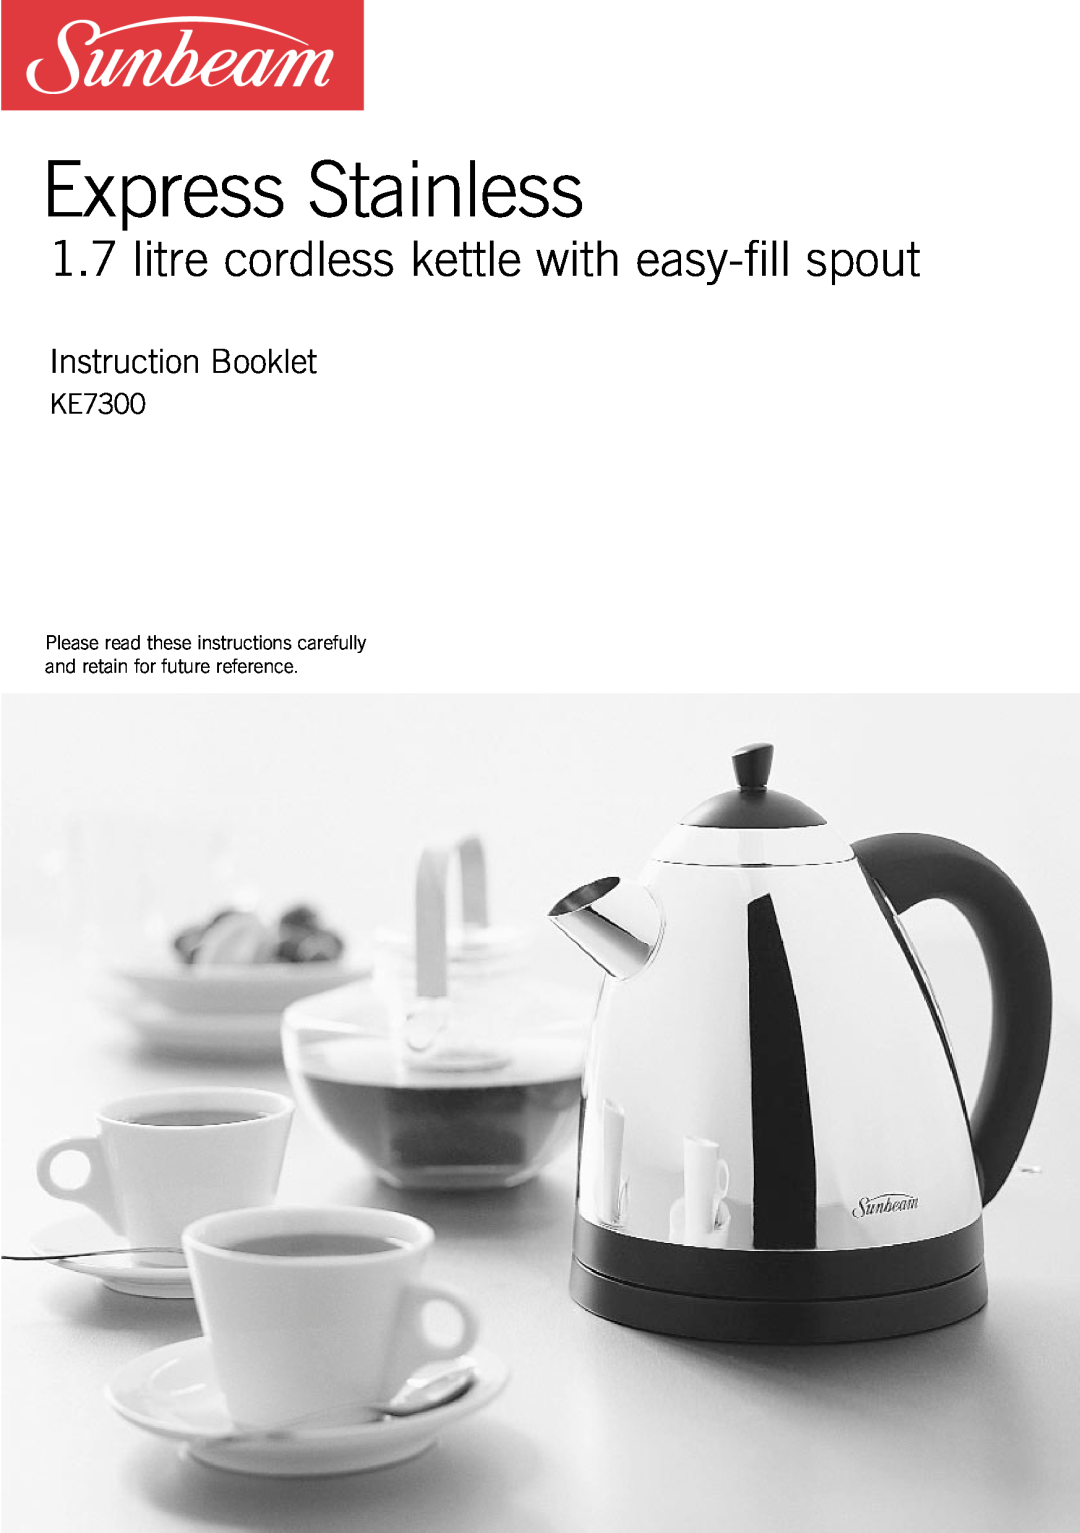 Sunbeam KE7300 manual Express Stainless, litre cordless kettle with easy-fill spout, Instruction Booklet 